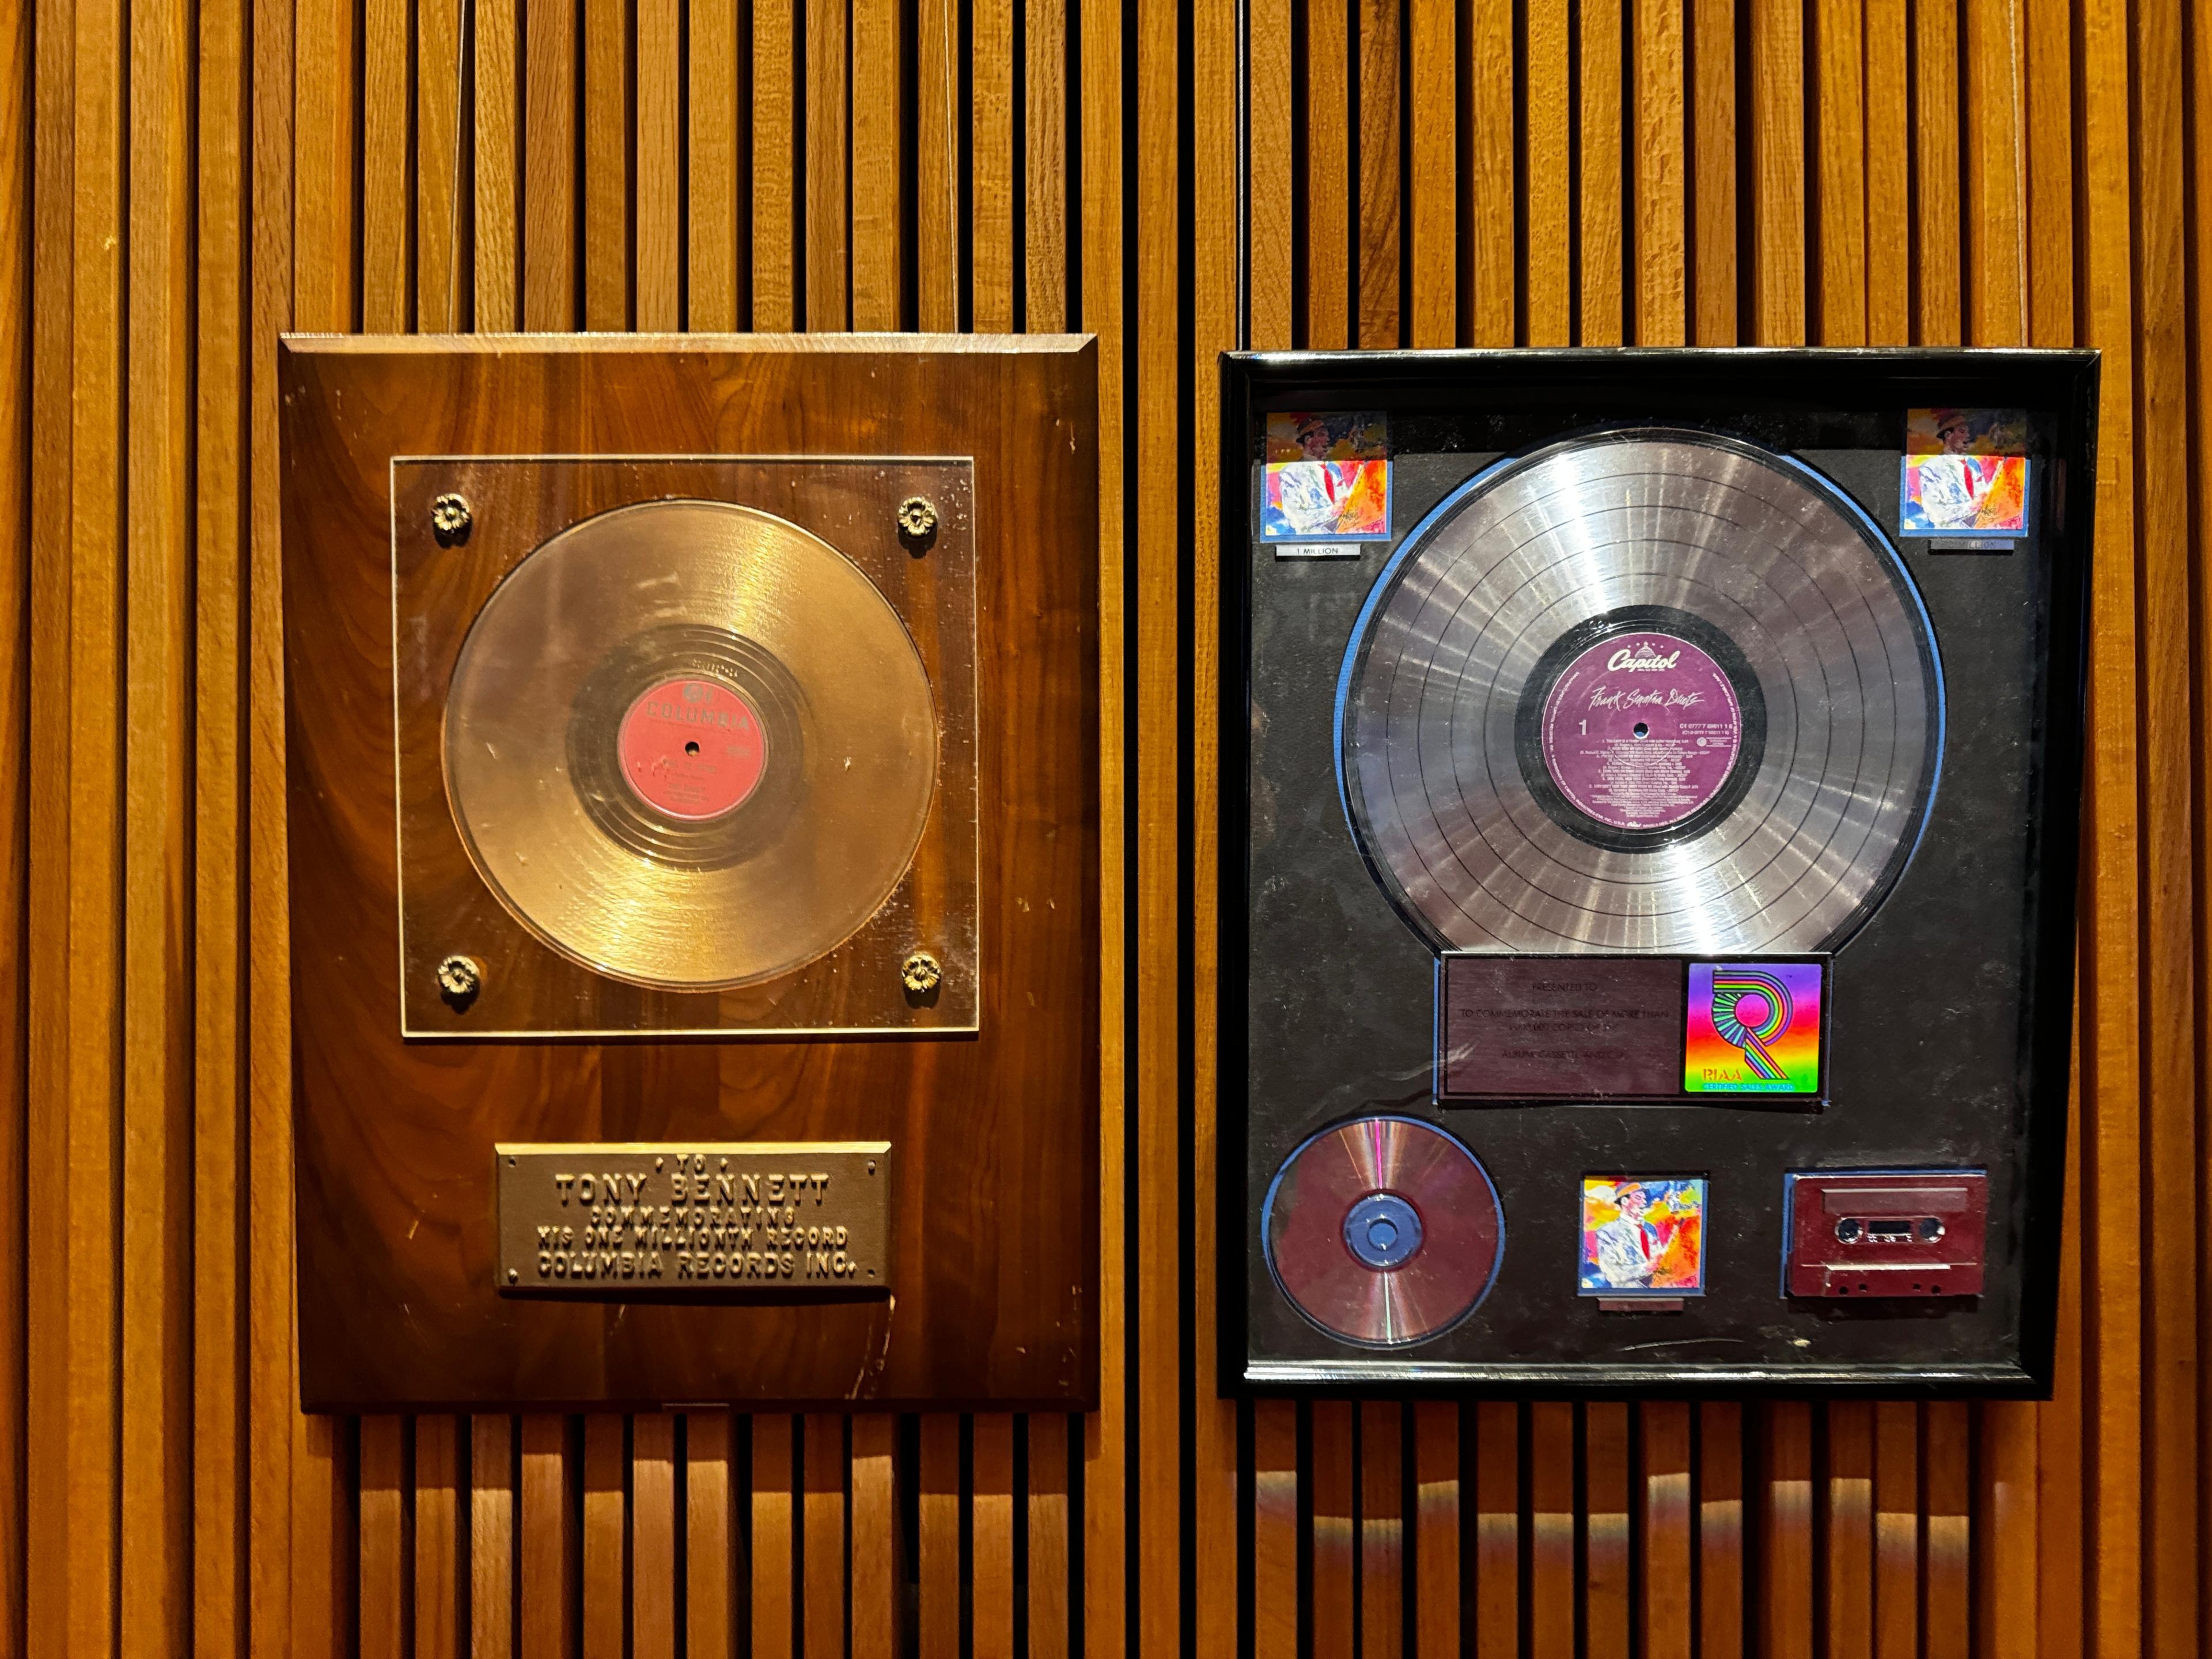 two plaques with records on them are hanging on a wooden wall .